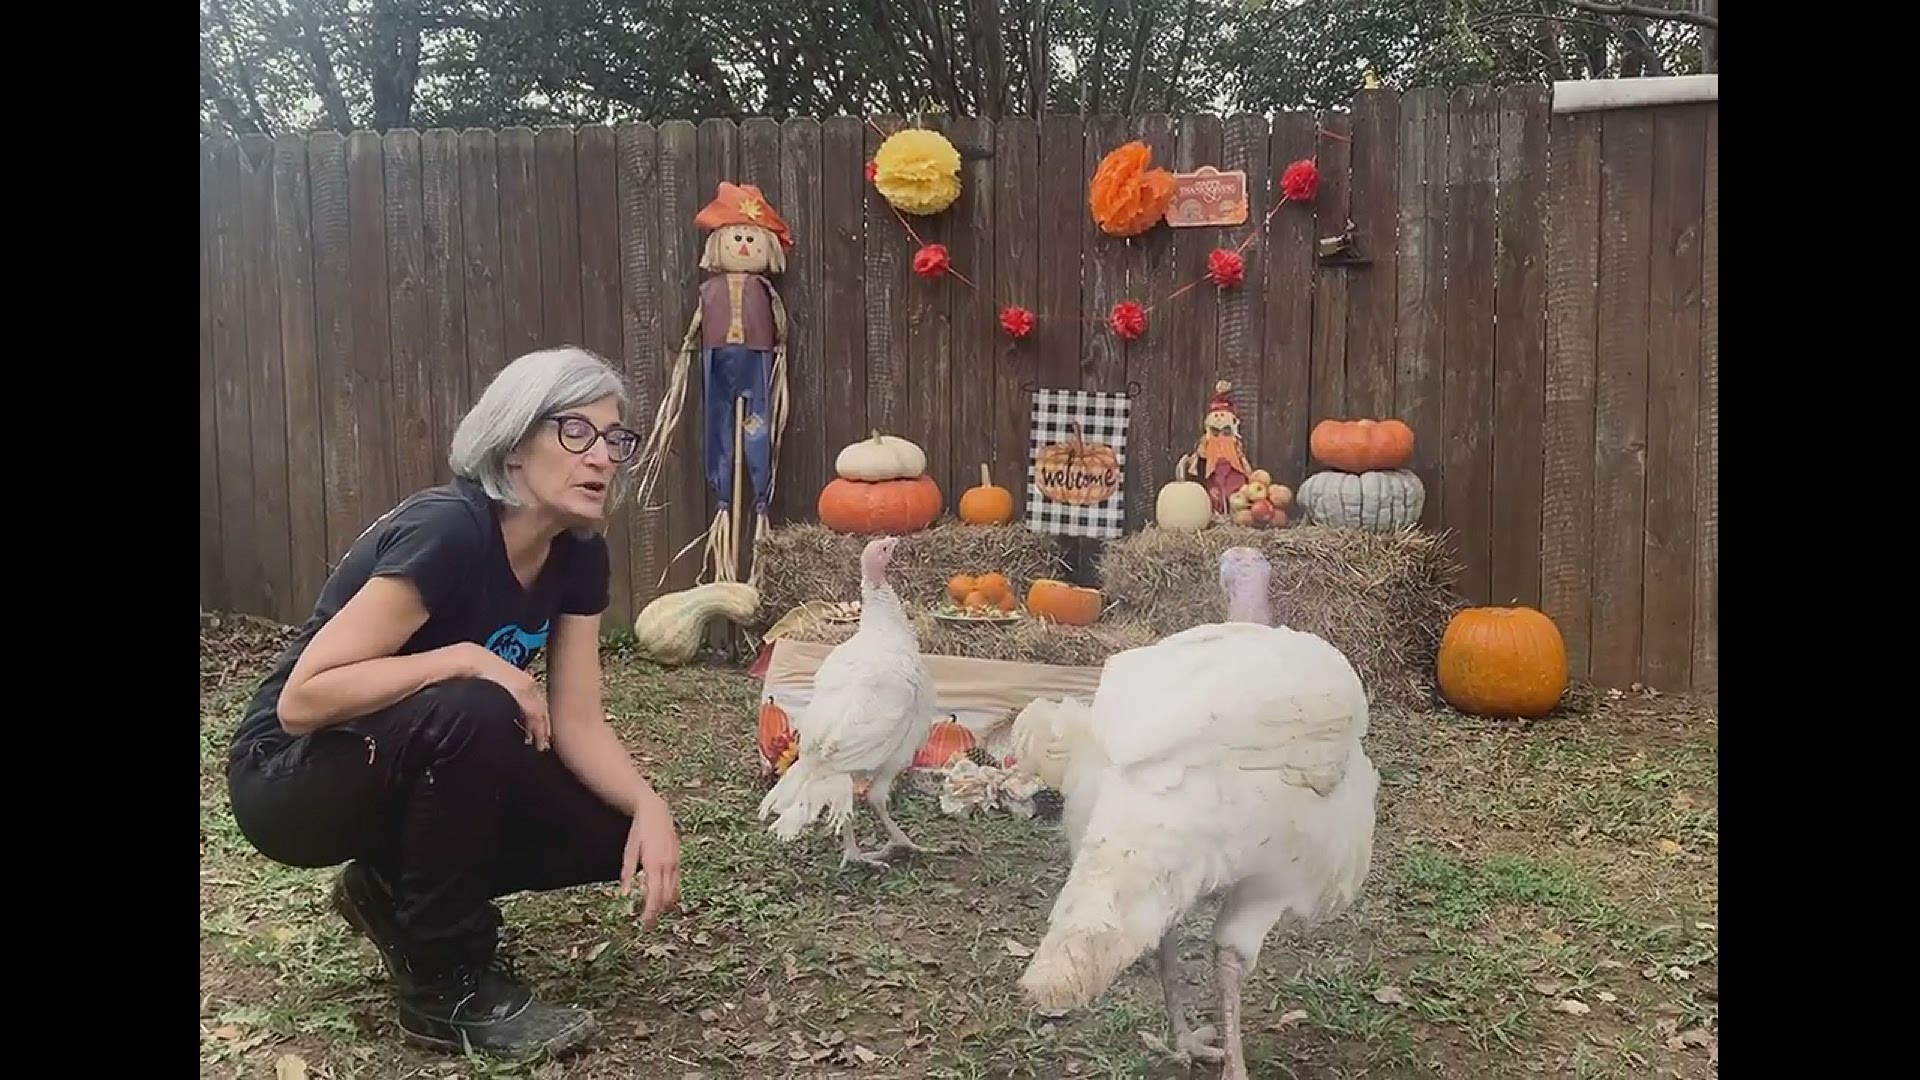 Destined for a dinner plate, Moonpie and Casper leaped to safety. The turkeys ended up in a North Carolina bird sanctuary.